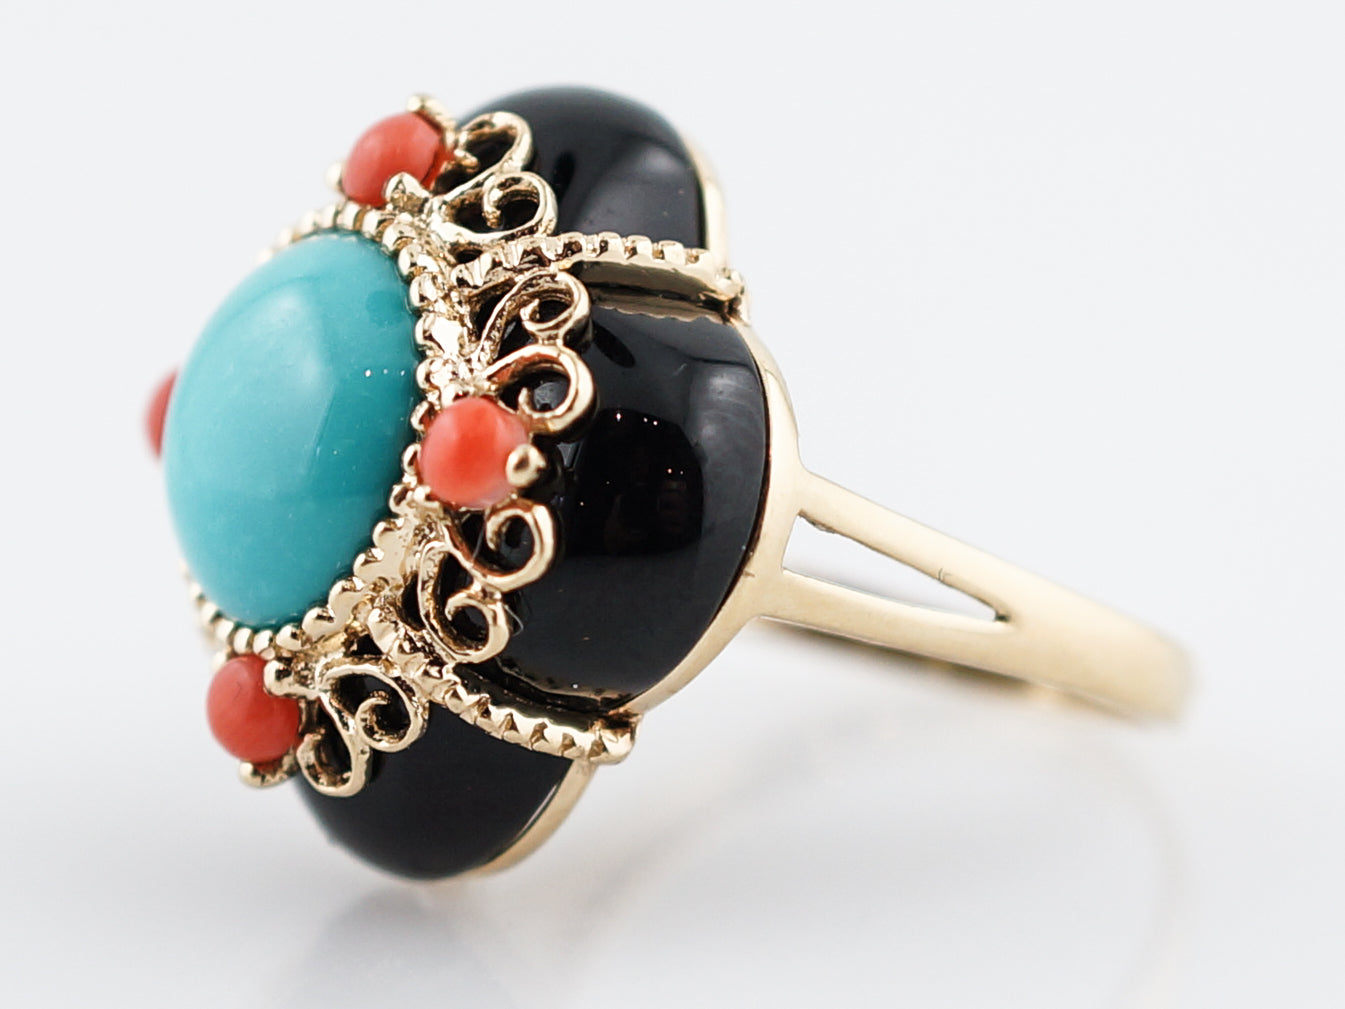 Vintage Cocktail Ring Mid-Century 2.30 Cabochon Cut Turquoise in 14k Yellow Gold